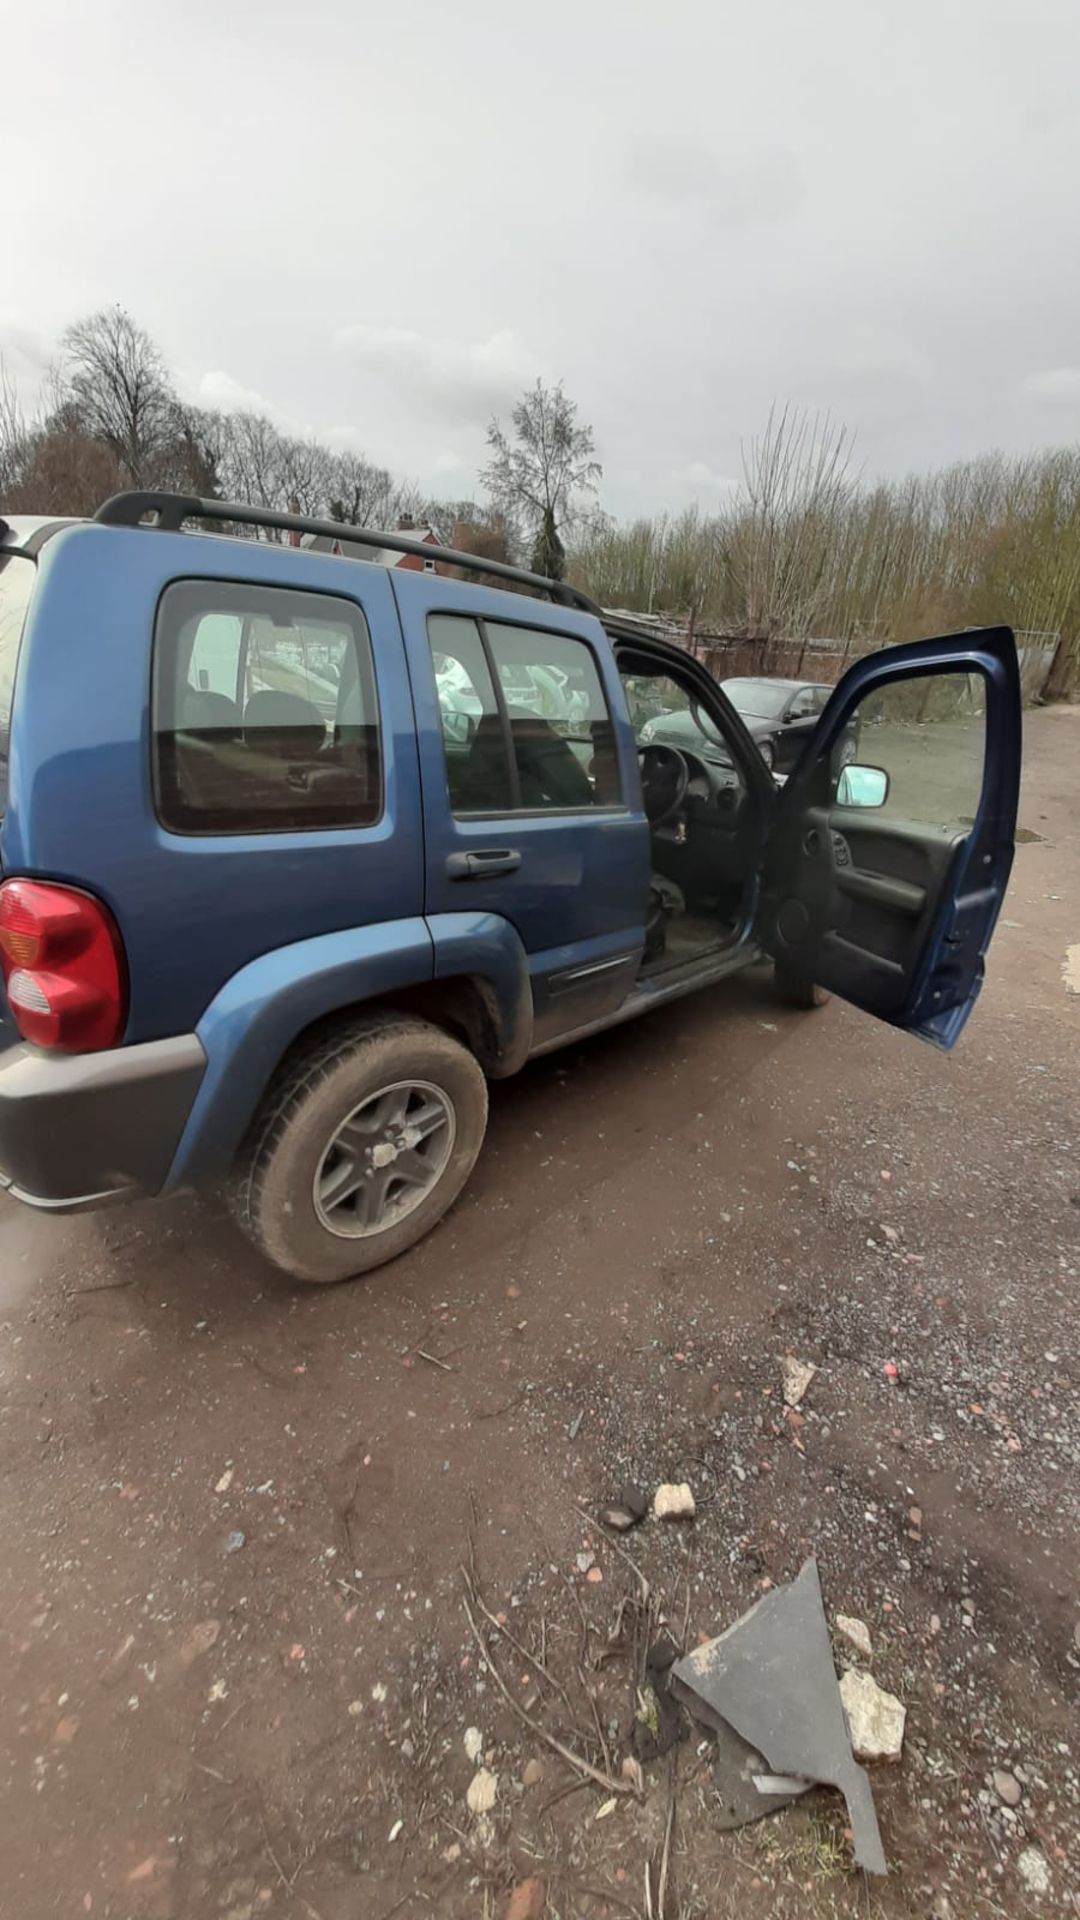 2004 JEEP CHEROKEE EXTREME SPORT A BLUE ESTATE, SHOWING 139,091 MILES, AUTO 4 GEARS *NO VAT* - Image 4 of 11